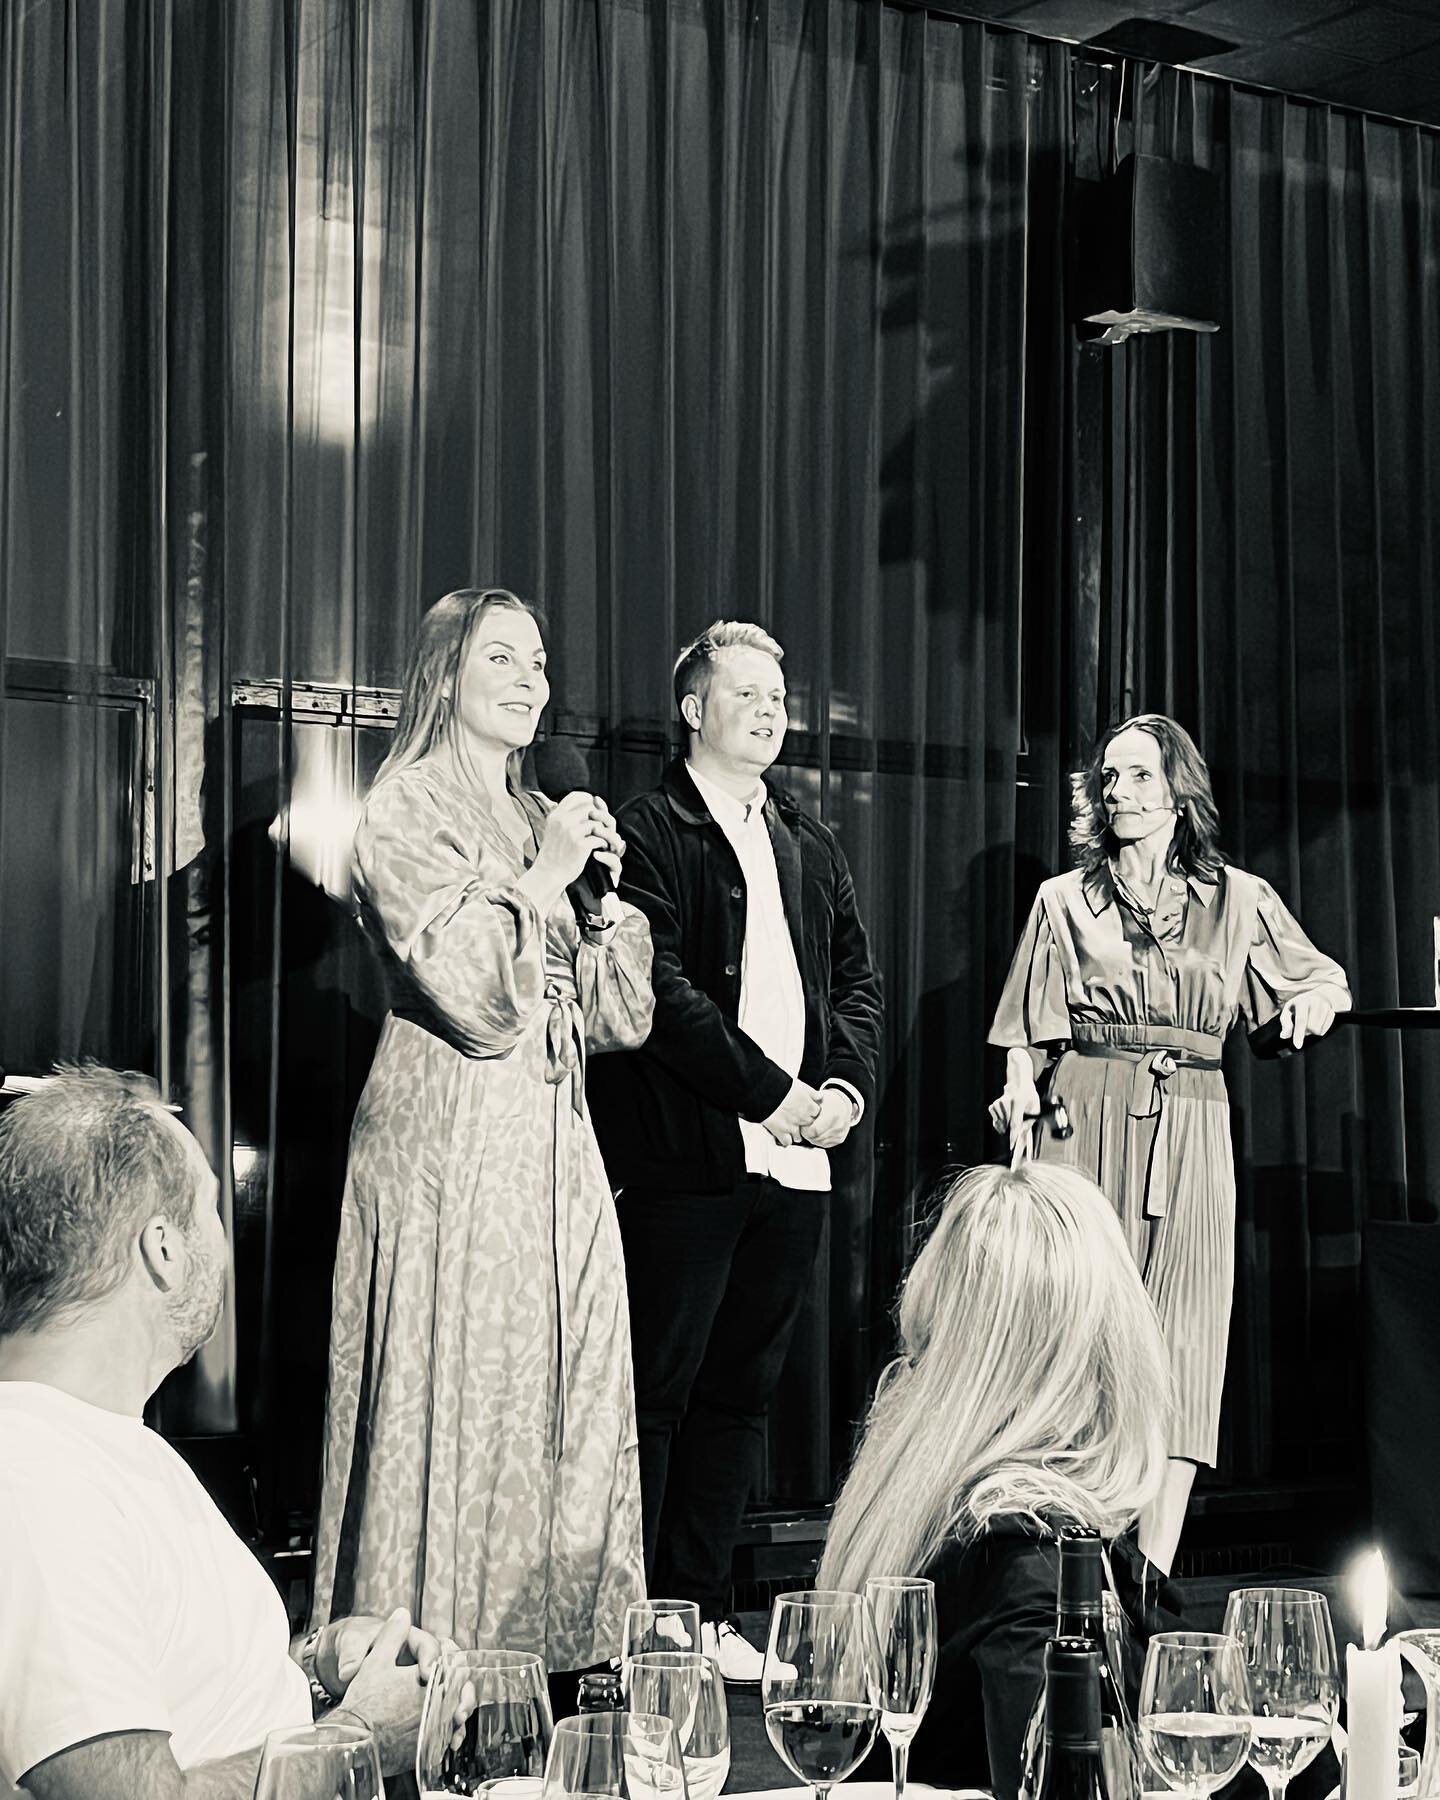 Every year I put a lot of energy into charity. This year I will focus on @rodekorsdk - starting with a big donation for an event last thursday.
What an evening! The 10 ambassadors has done an amazing job this year❤️
A special applause to my dear cous